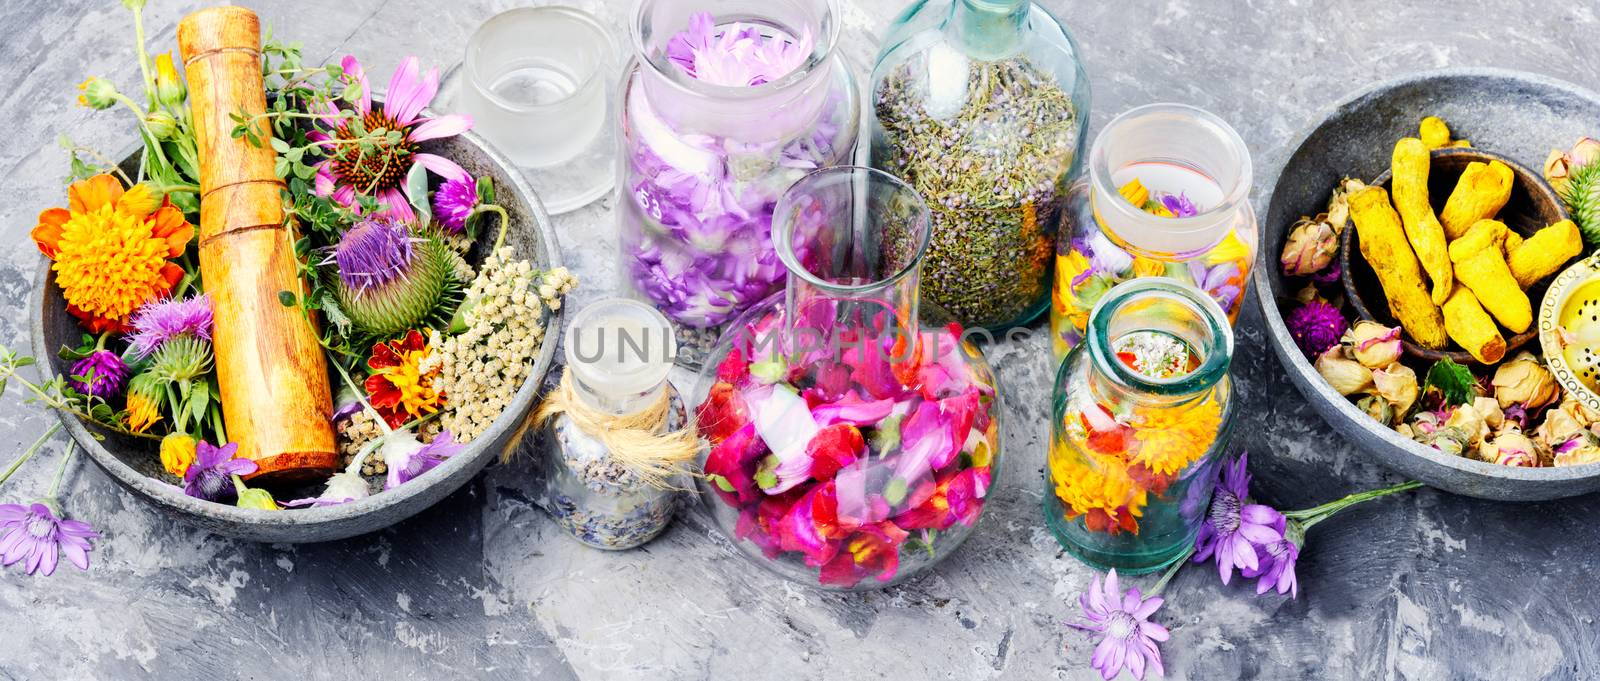 Various raw medical herbs and flowers.Alternative medicine concept